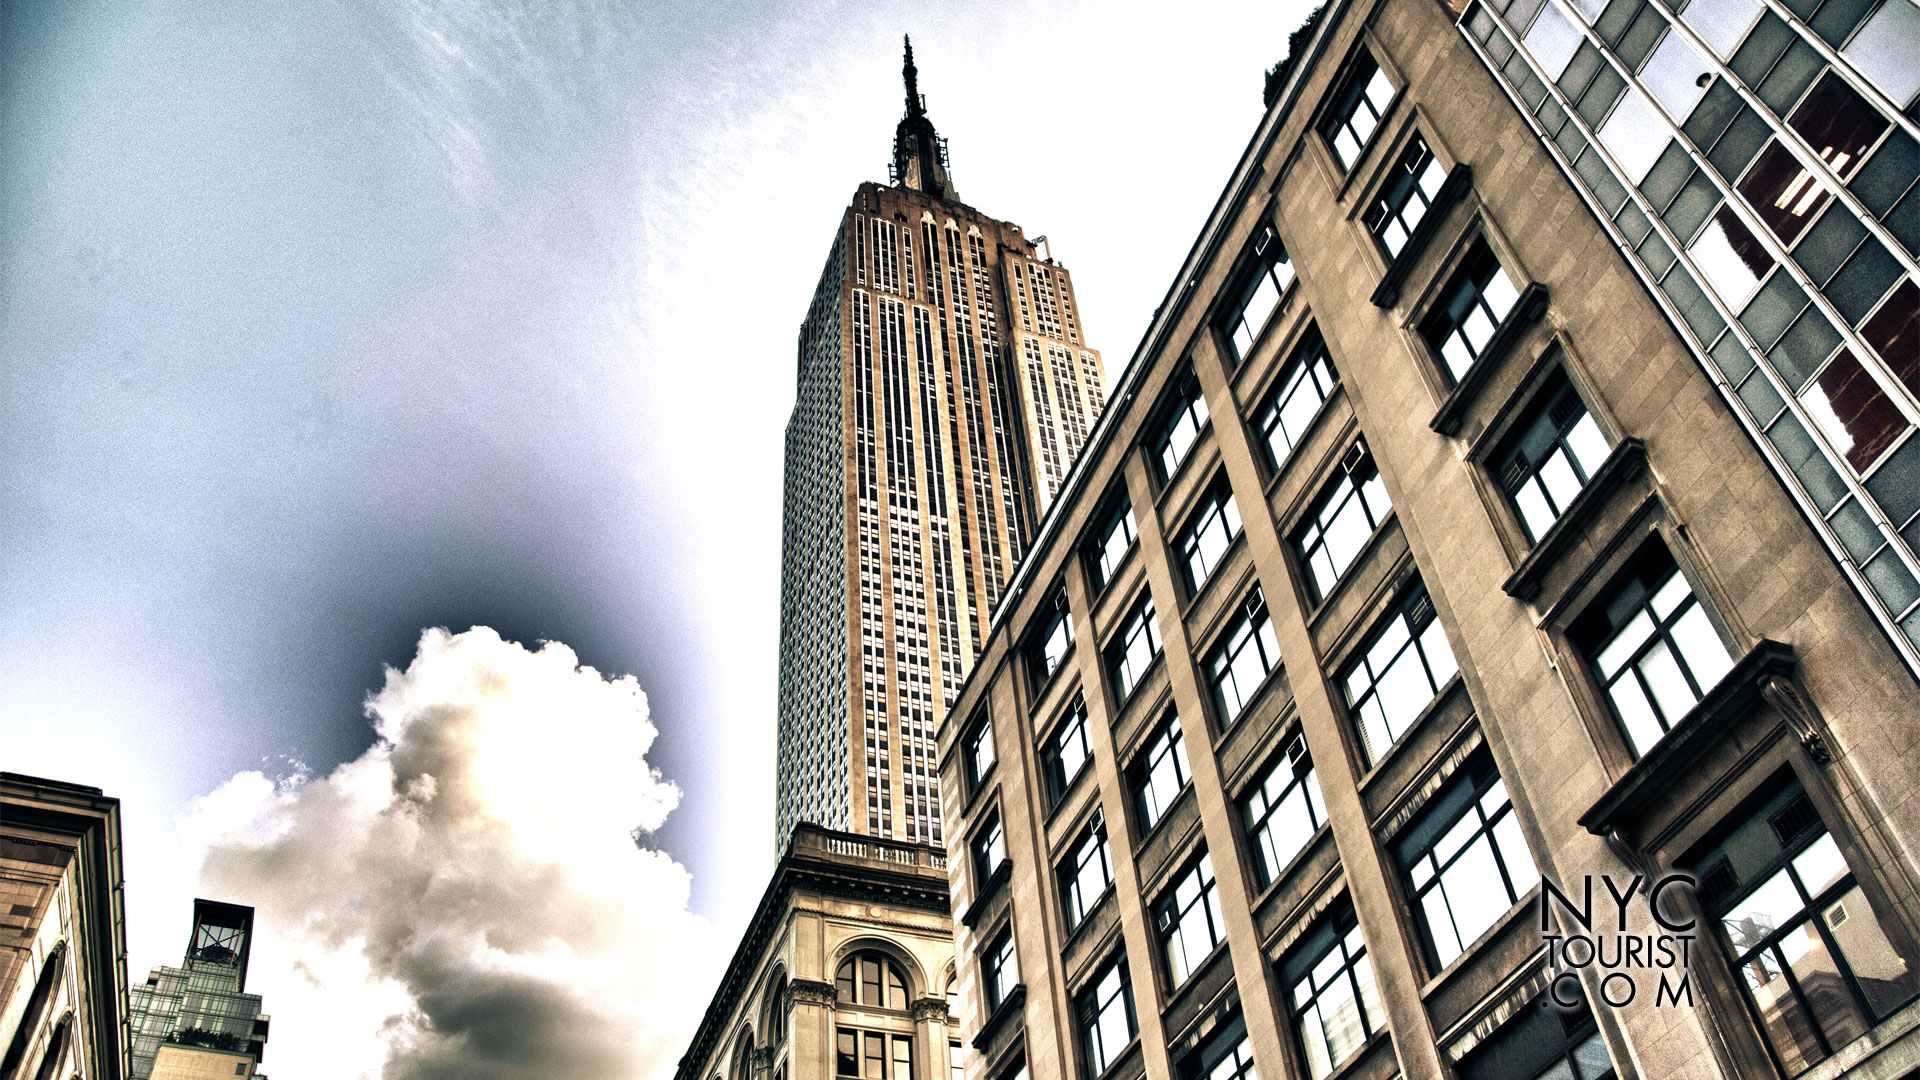 Man Made Empire State Building HD Wallpaper | Background Image